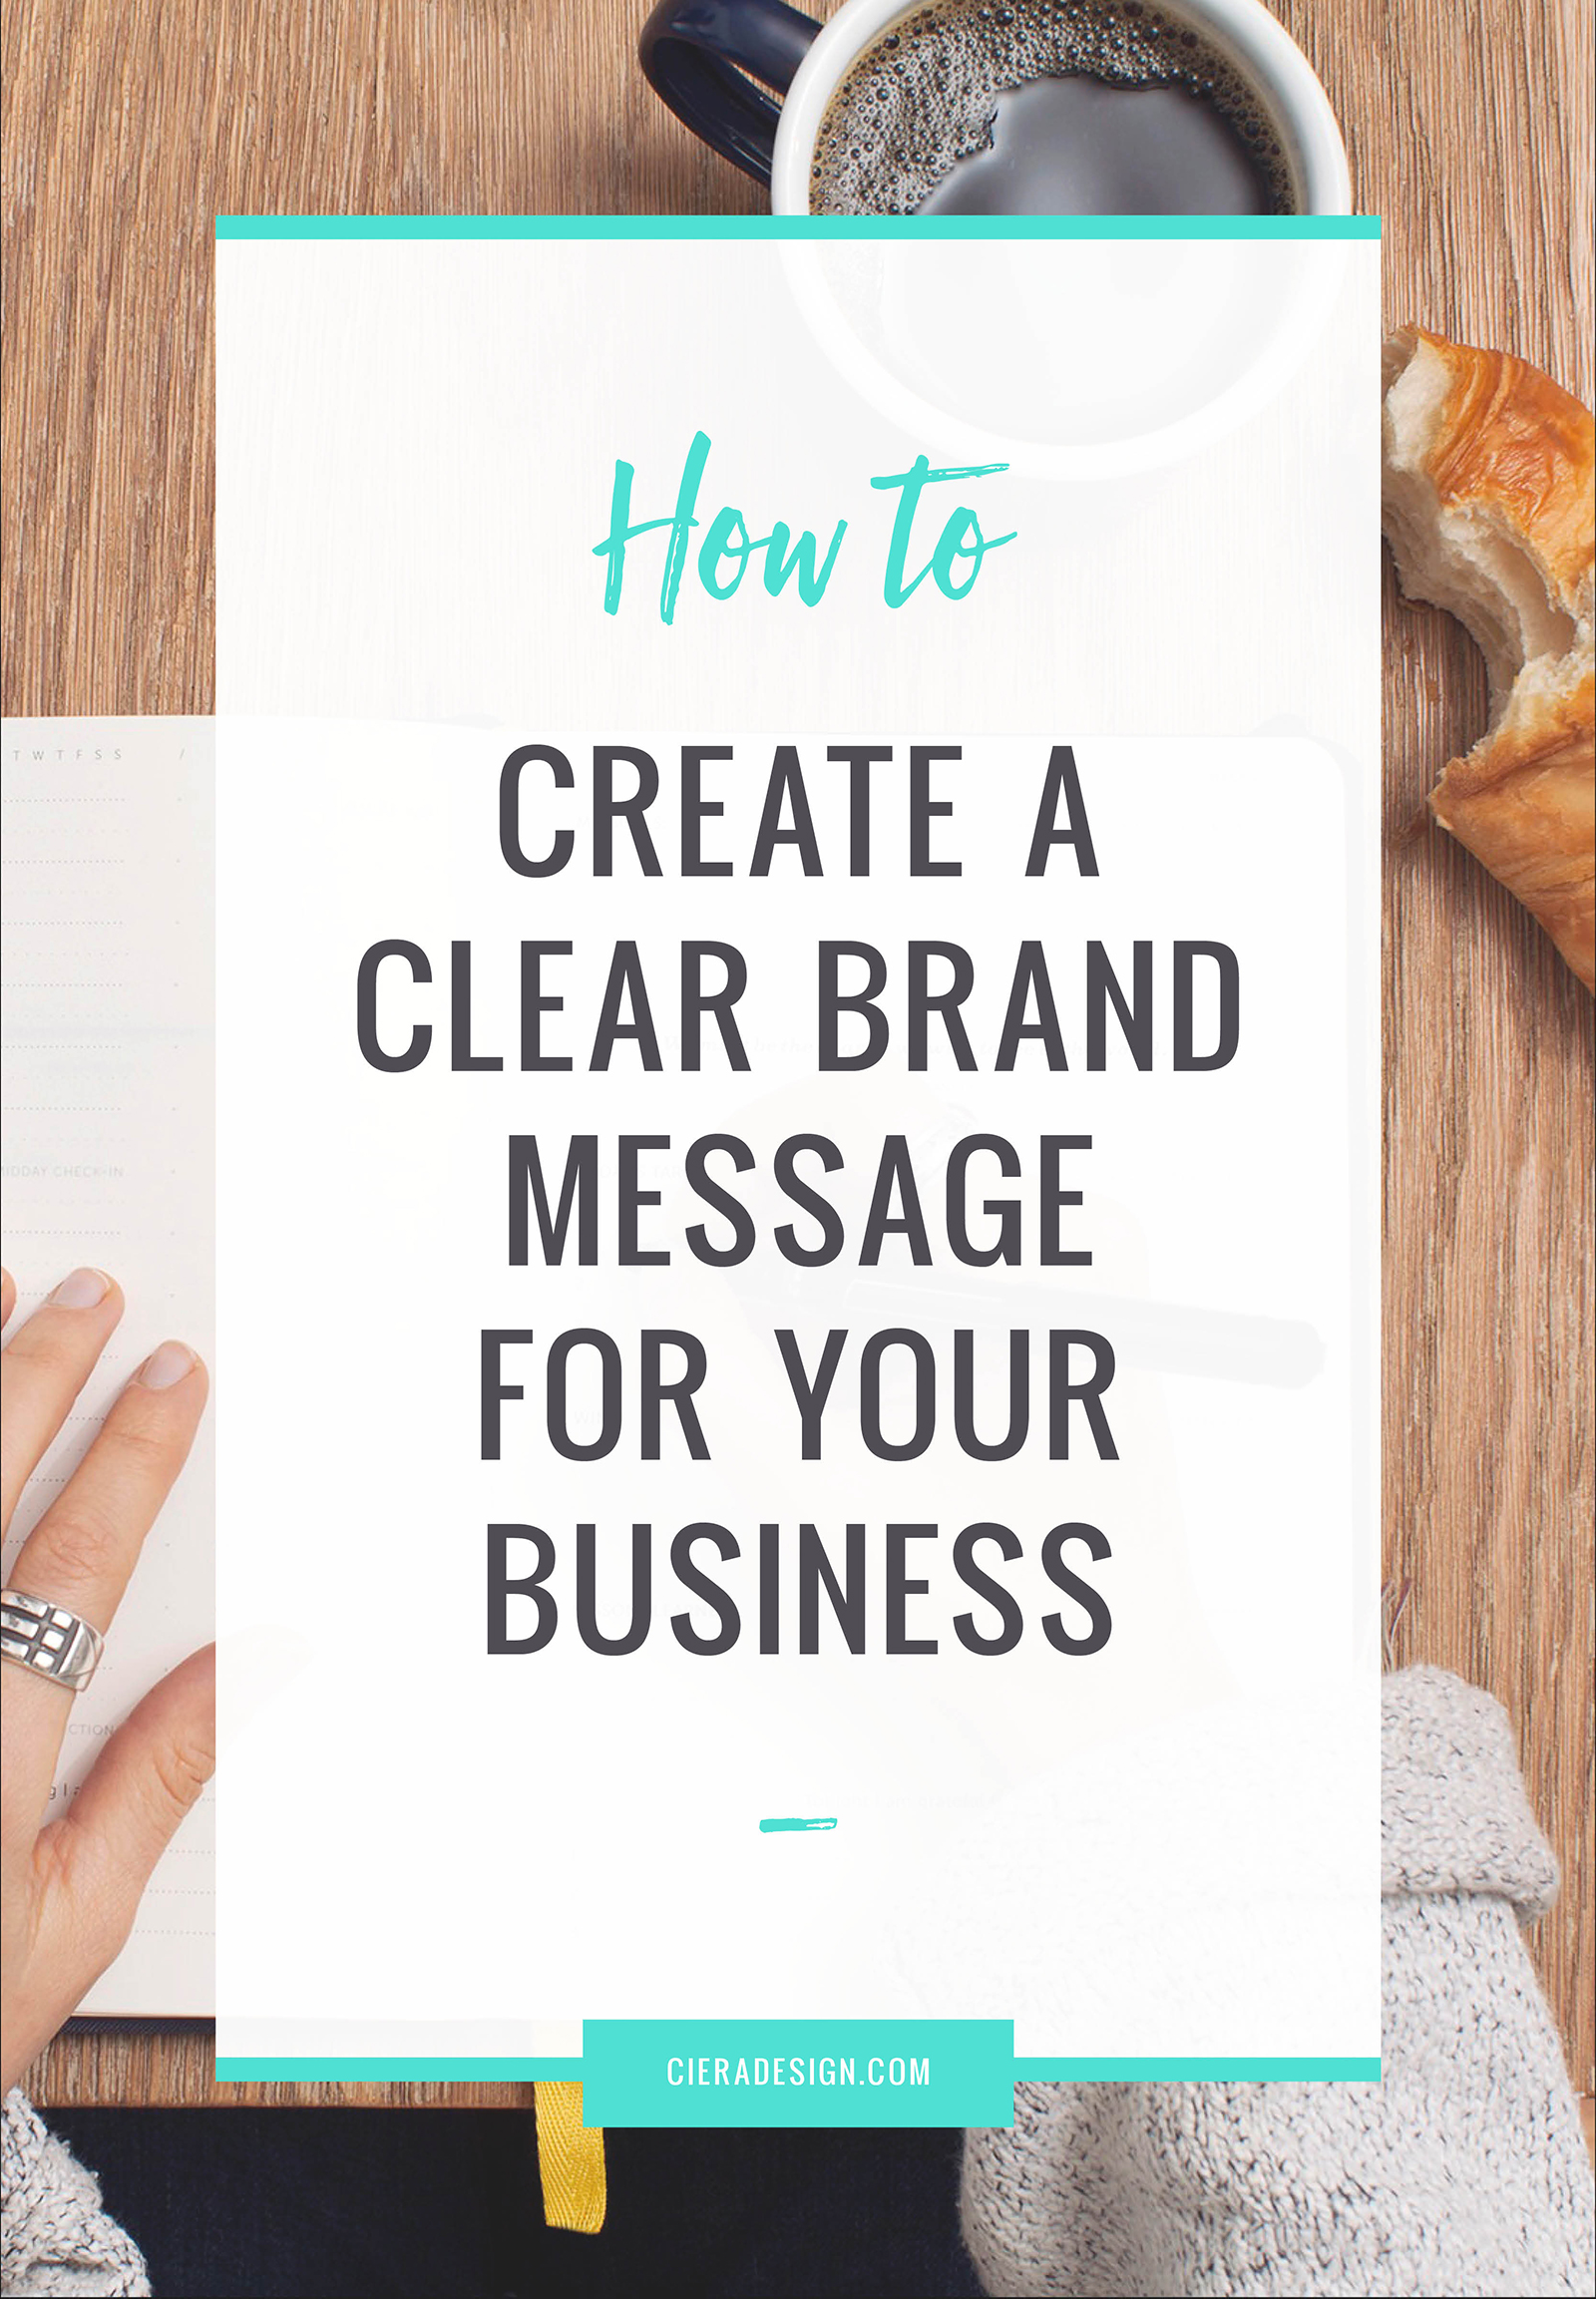 If you’re wondering how to create a clear brand message for your business, then here are some top tips.